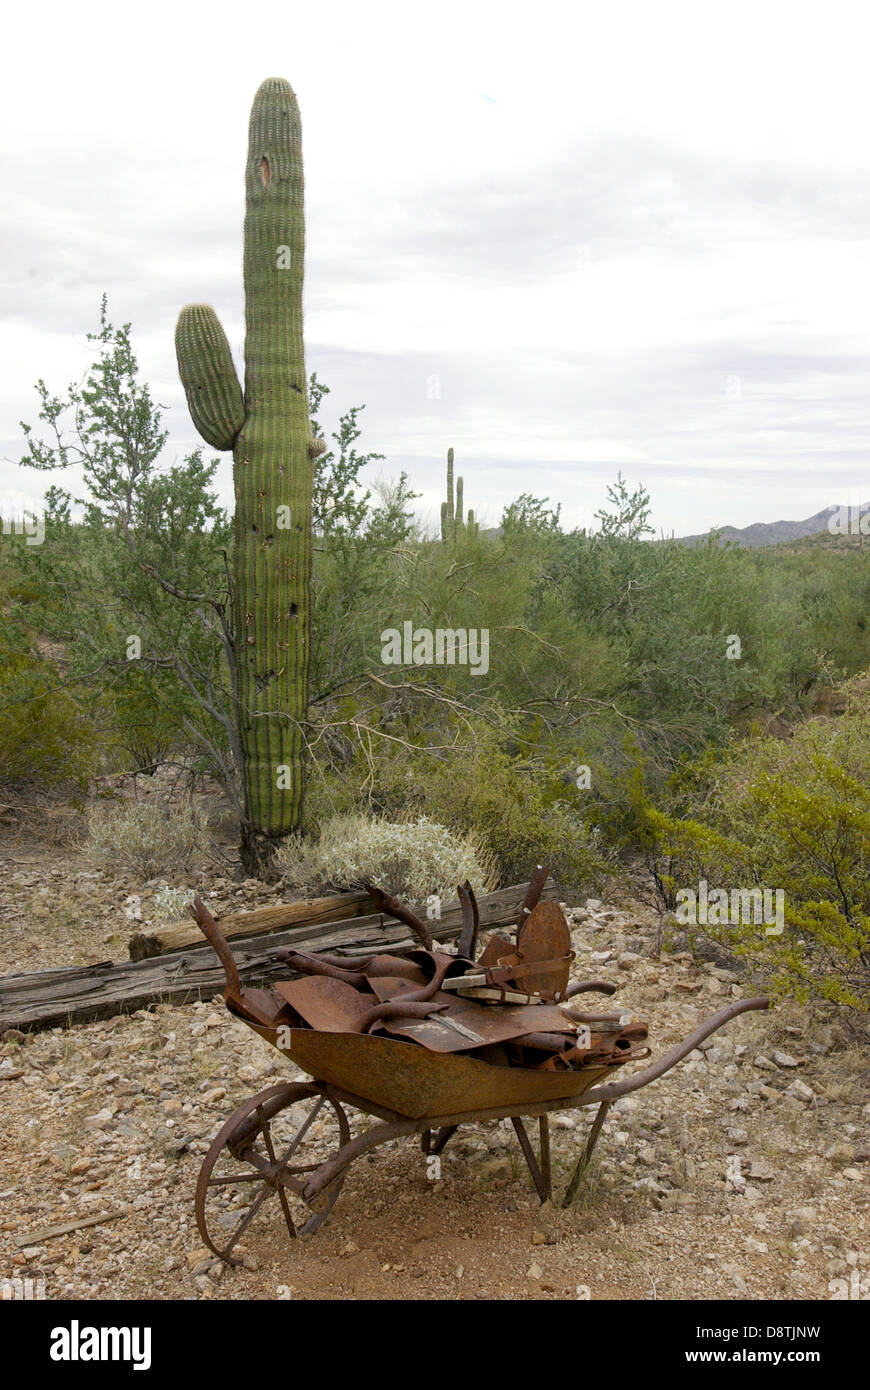 Wheel barrel with for gold ores with Saguaro cactus in background Arizona, Gold rush, Saguaro cacti, mining, mine, gold ores, Stock Photo